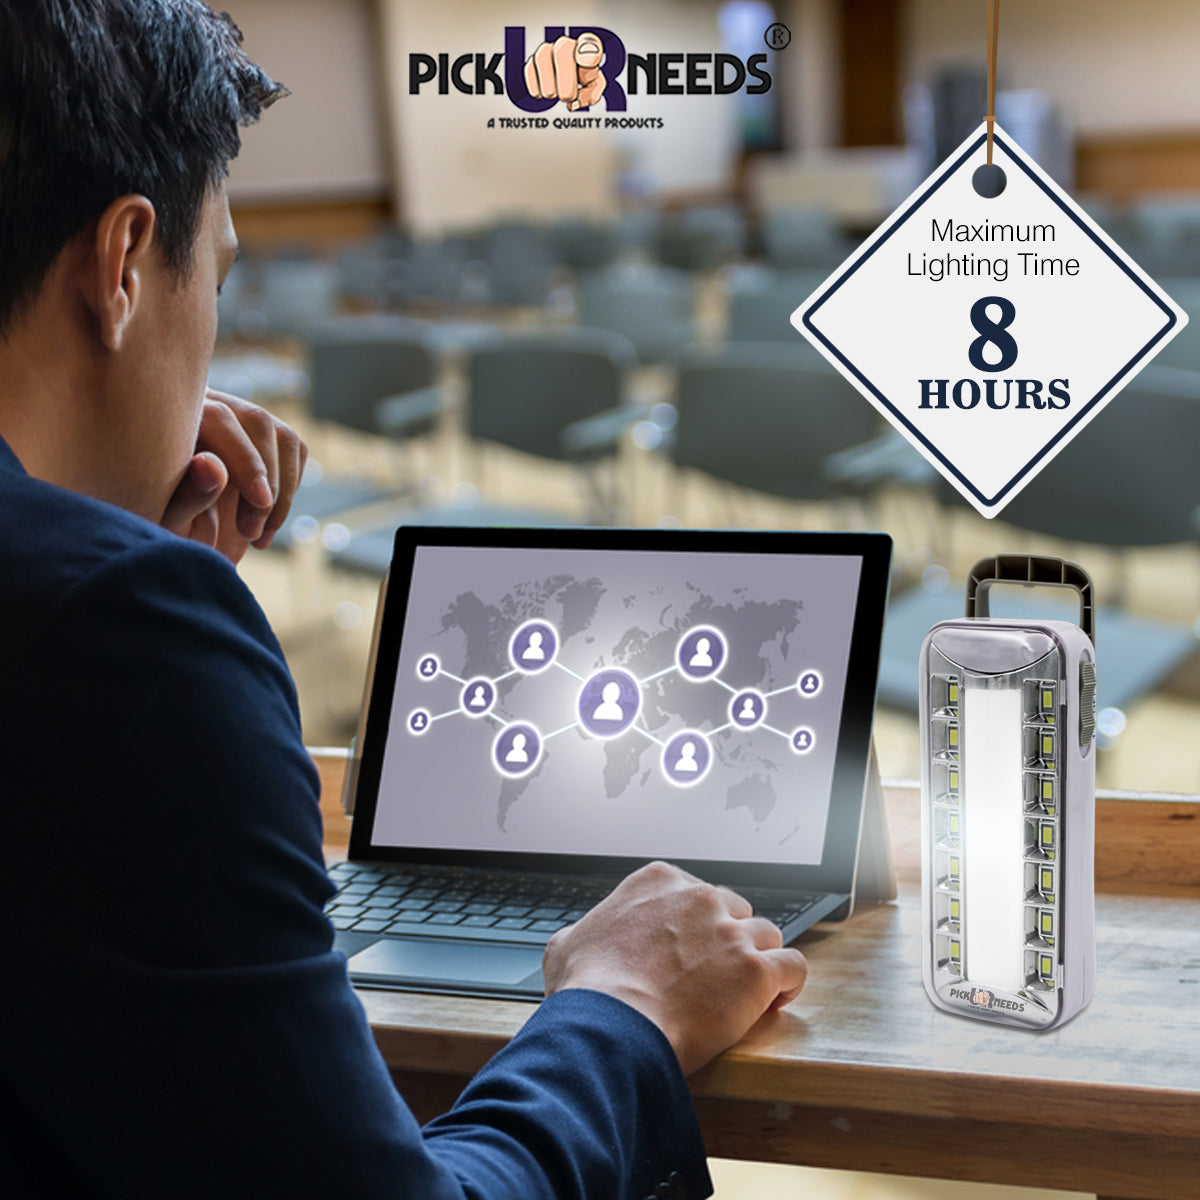 Pick Ur Needs Rechargeable 2 Tube+14 SMD Small LED Light With 6 hrs Lantern Emergency Light